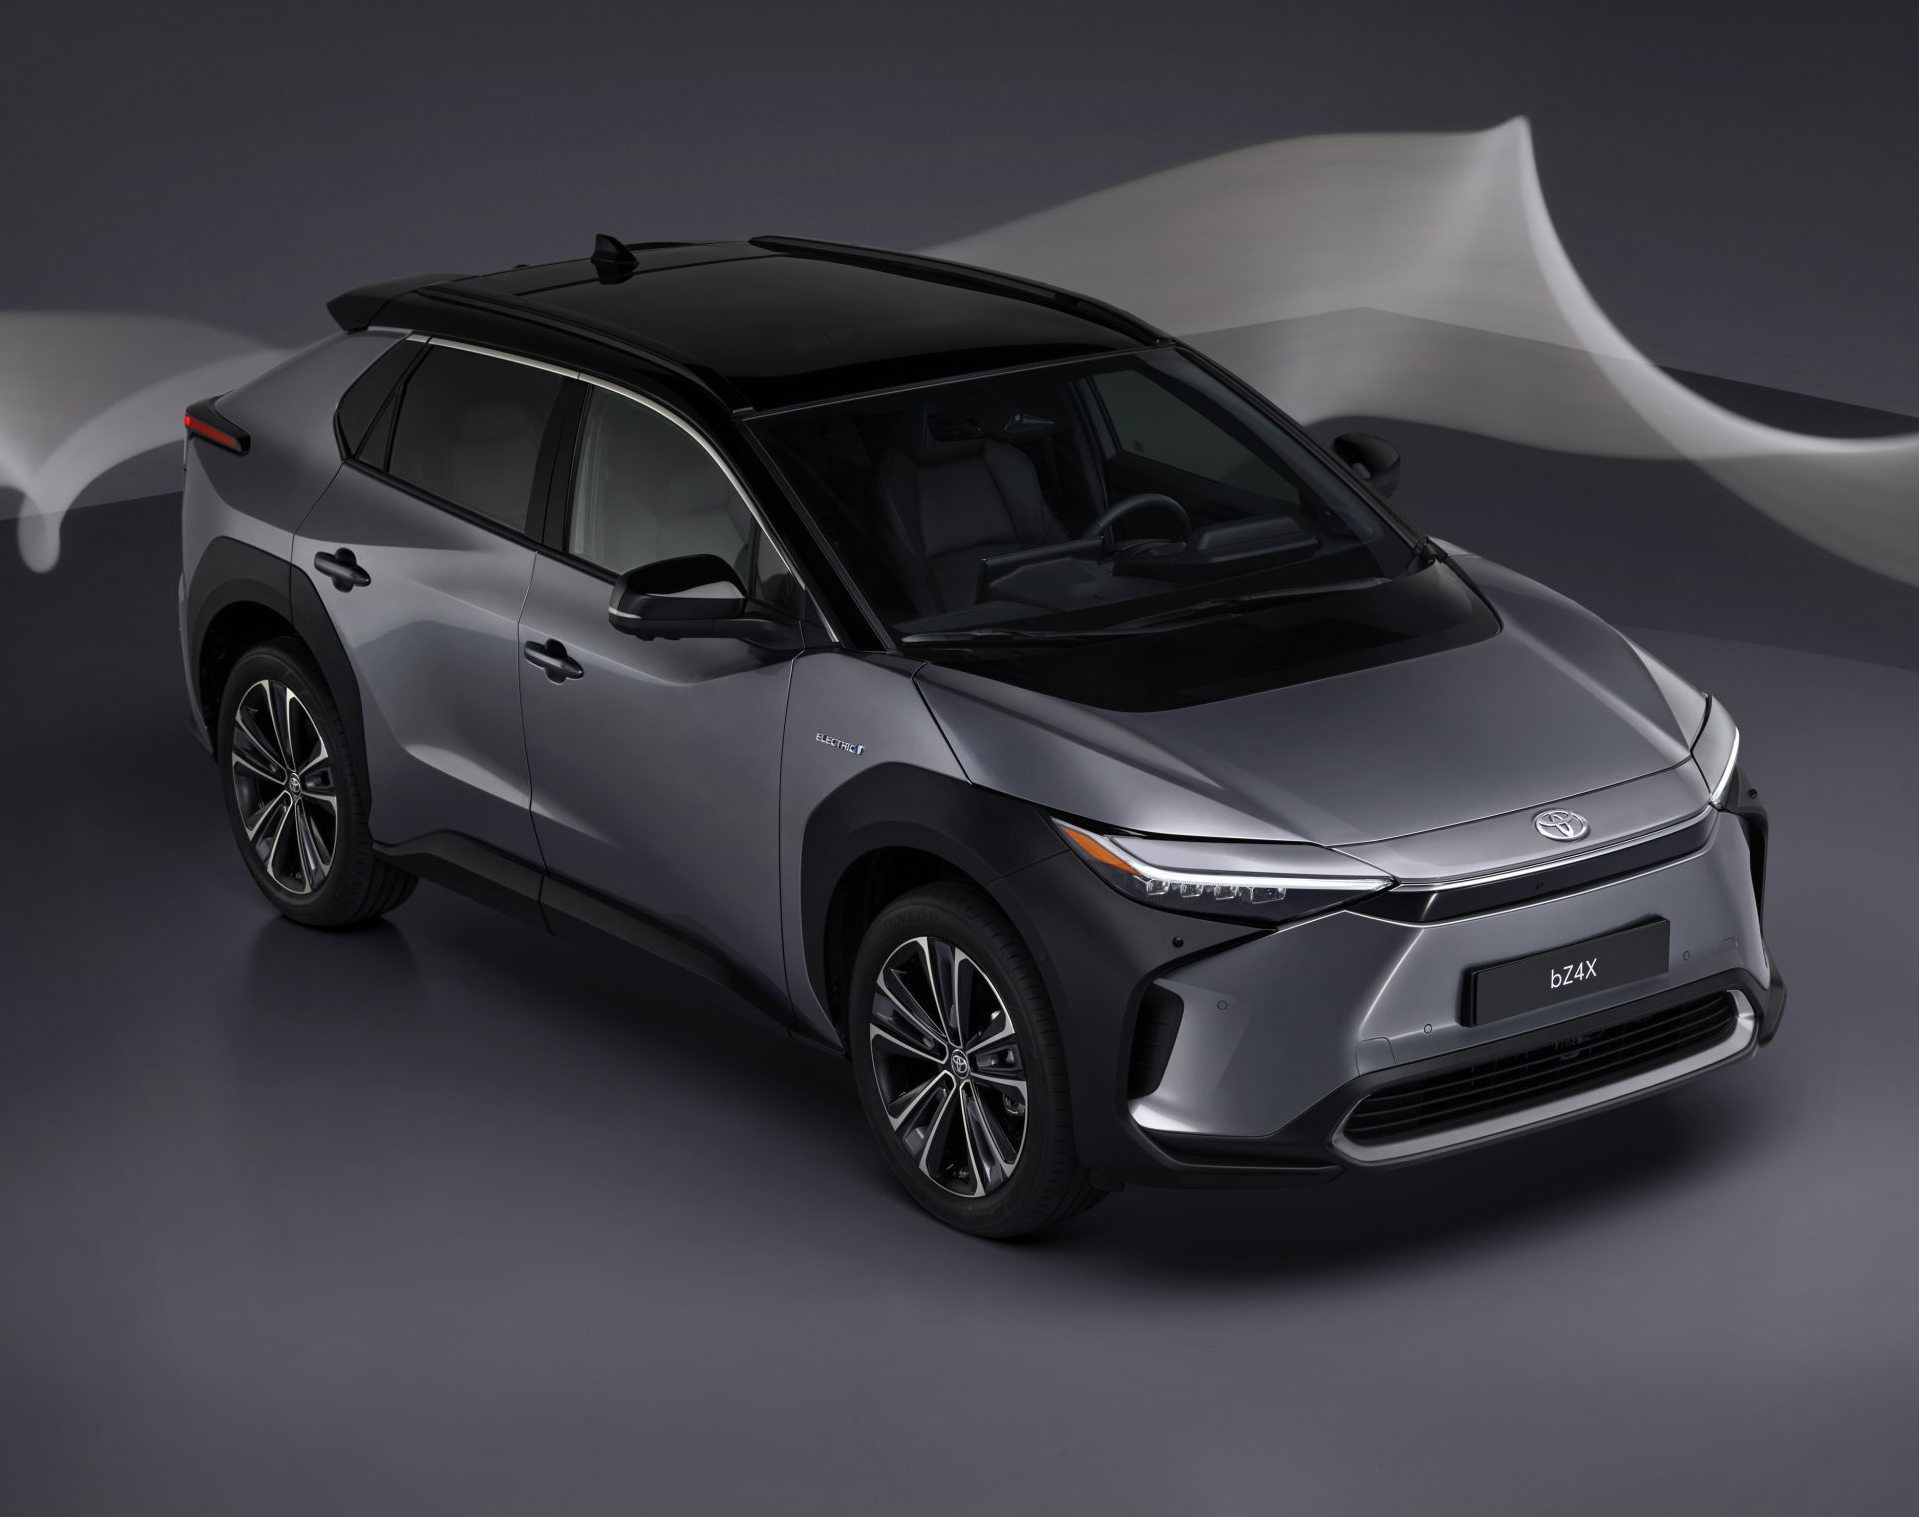 Toyota's bZ4X electric SUV has a solar roof and a wing-shaped